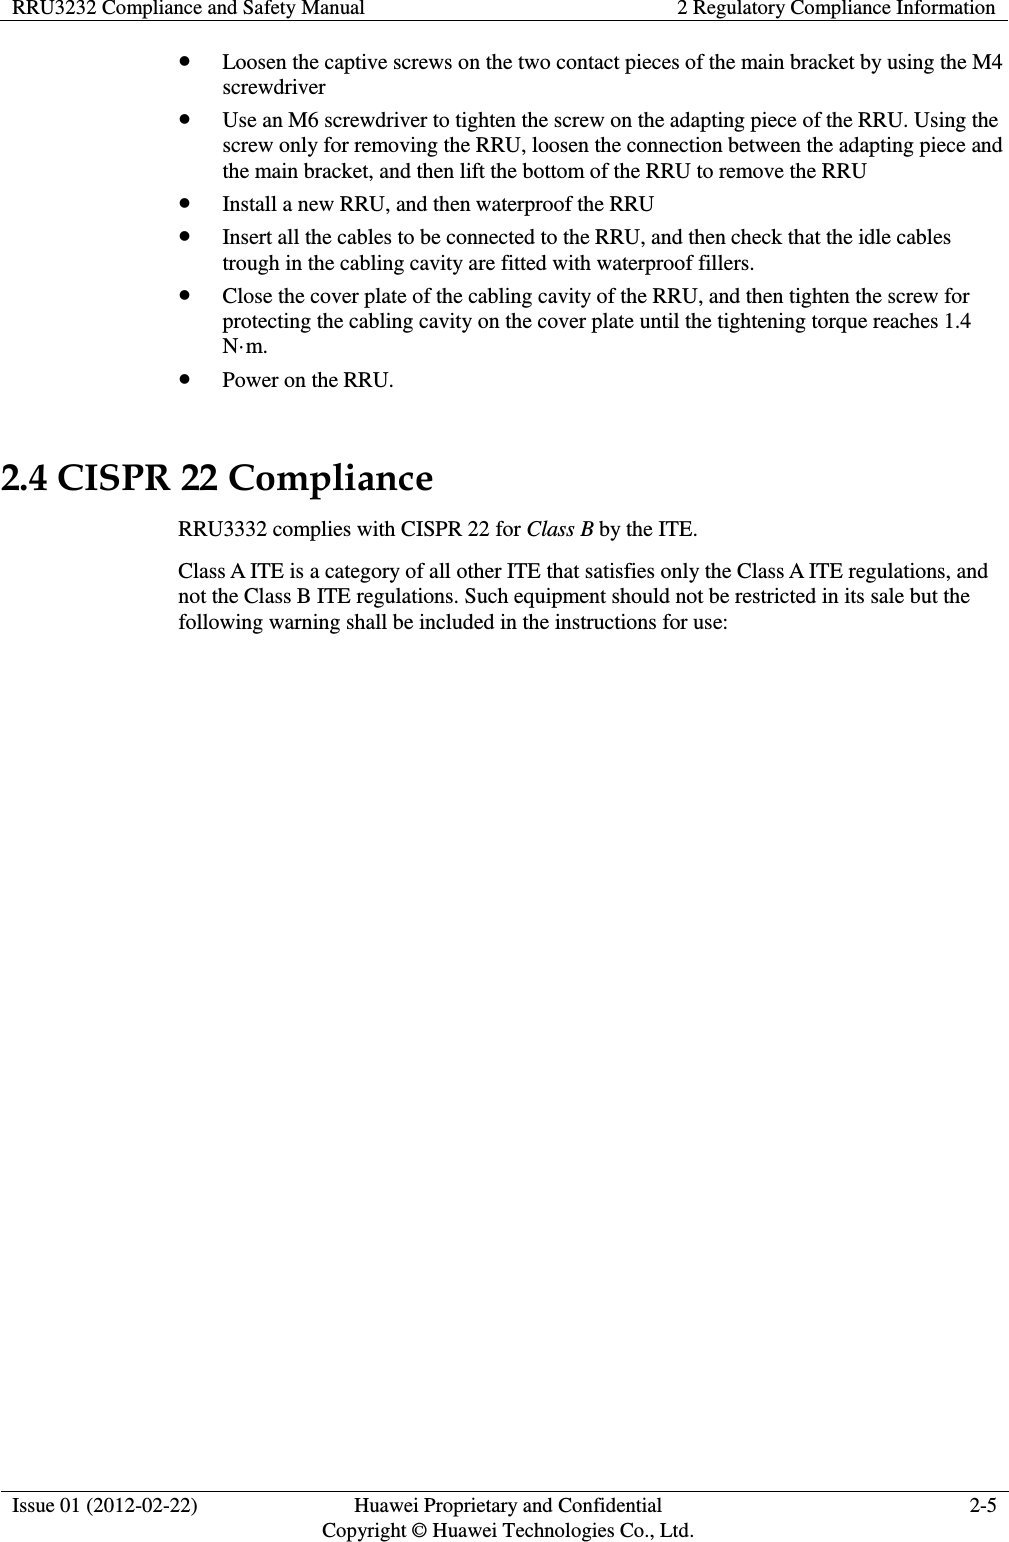 RRU3232 Compliance and Safety Manual 2 Regulatory Compliance Information  Issue 01 (2012-02-22) Huawei Proprietary and Confidential         Copyright © Huawei Technologies Co., Ltd. 2-5   Loosen the captive screws on the two contact pieces of the main bracket by using the M4 screwdriver  Use an M6 screwdriver to tighten the screw on the adapting piece of the RRU. Using the screw only for removing the RRU, loosen the connection between the adapting piece and the main bracket, and then lift the bottom of the RRU to remove the RRU  Install a new RRU, and then waterproof the RRU  Insert all the cables to be connected to the RRU, and then check that the idle cables trough in the cabling cavity are fitted with waterproof fillers.  Close the cover plate of the cabling cavity of the RRU, and then tighten the screw for protecting the cabling cavity on the cover plate until the tightening torque reaches 1.4 N·m.  Power on the RRU. 2.4 CISPR 22 Compliance RRU3332 complies with CISPR 22 for Class B by the ITE.   Class A ITE is a category of all other ITE that satisfies only the Class A ITE regulations, and not the Class B ITE regulations. Such equipment should not be restricted in its sale but the following warning shall be included in the instructions for use:  